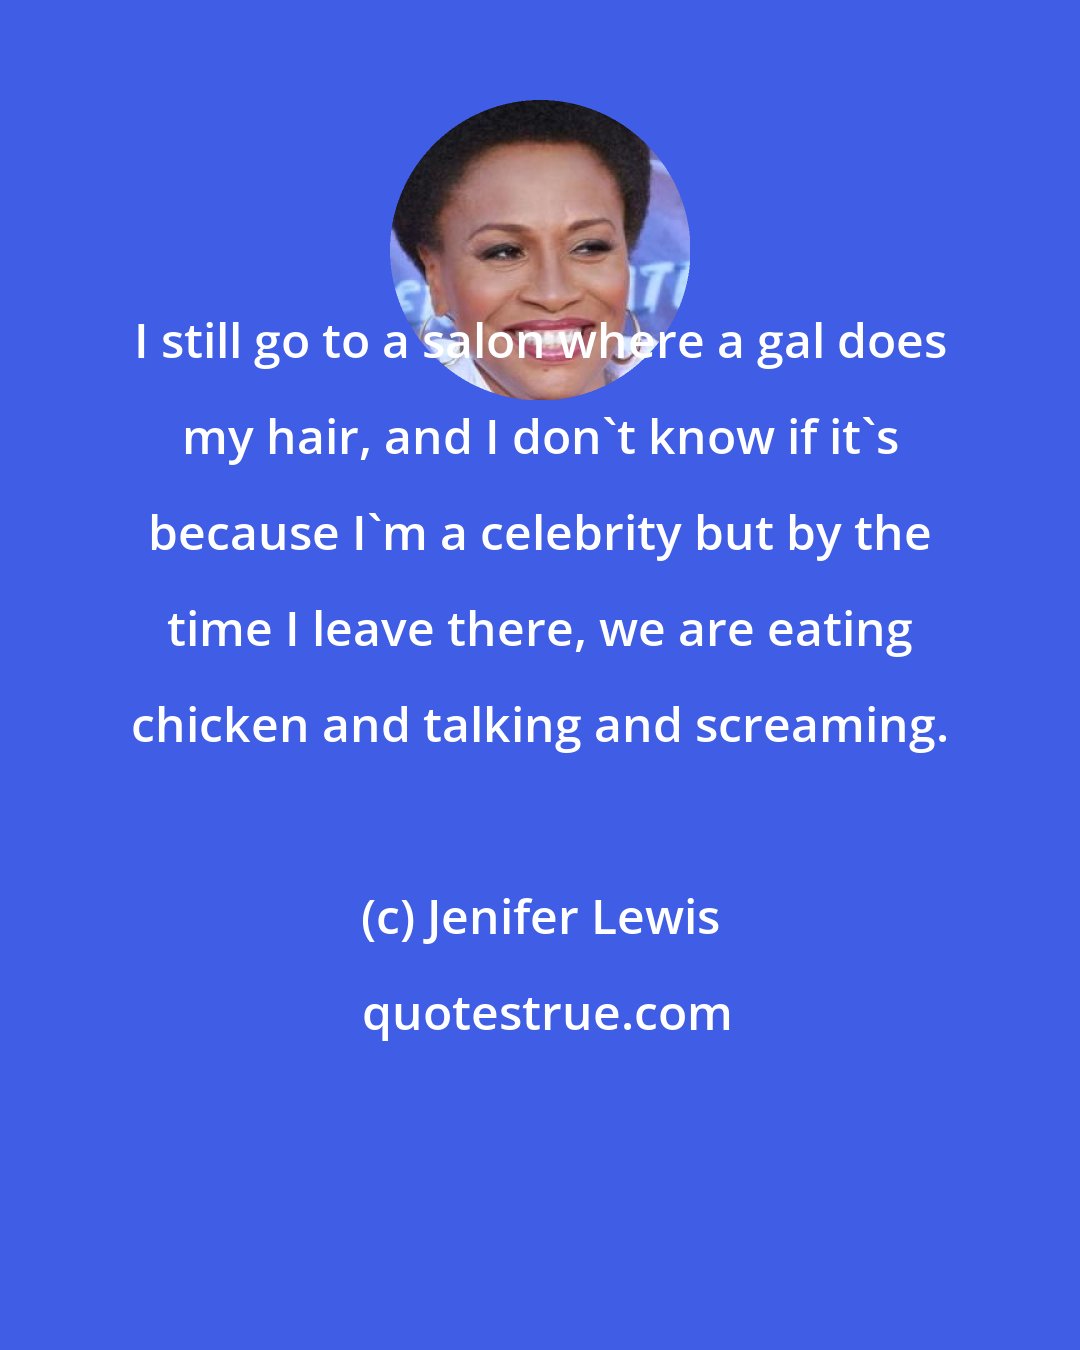 Jenifer Lewis: I still go to a salon where a gal does my hair, and I don't know if it's because I'm a celebrity but by the time I leave there, we are eating chicken and talking and screaming.